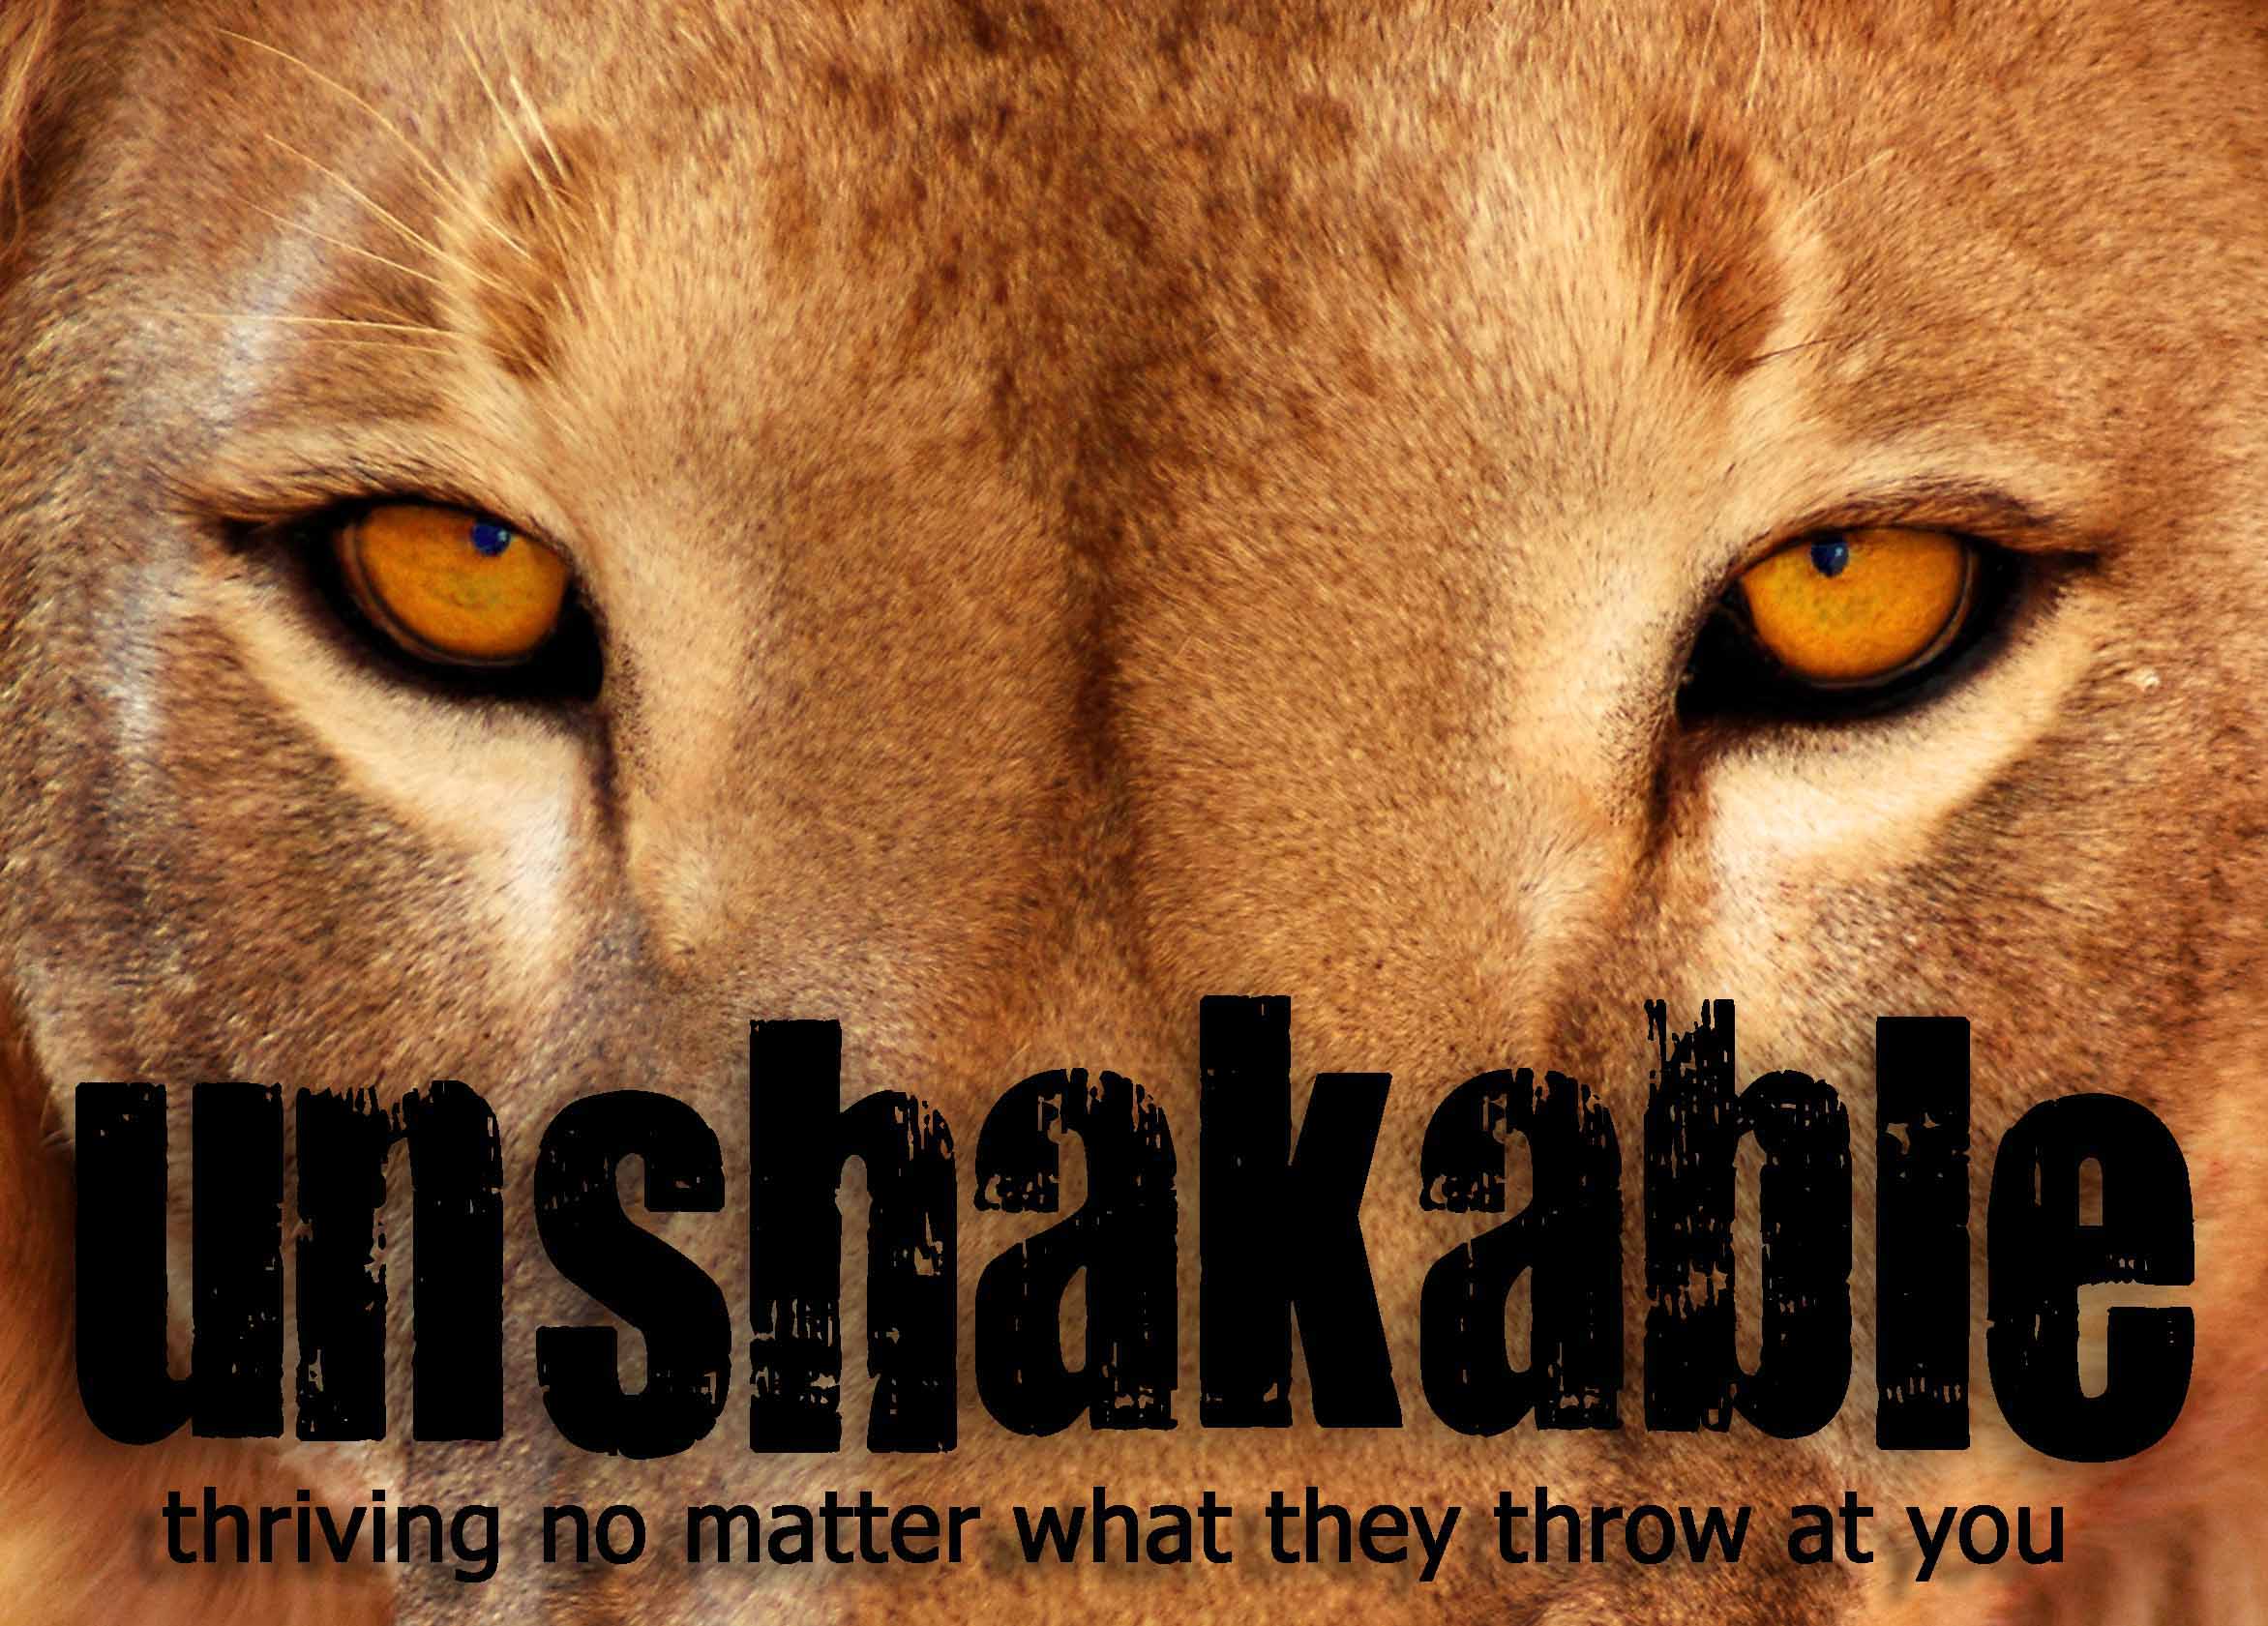 11-13-16 Unshakable - Thriving No Matter What They Throw At You - Part 8